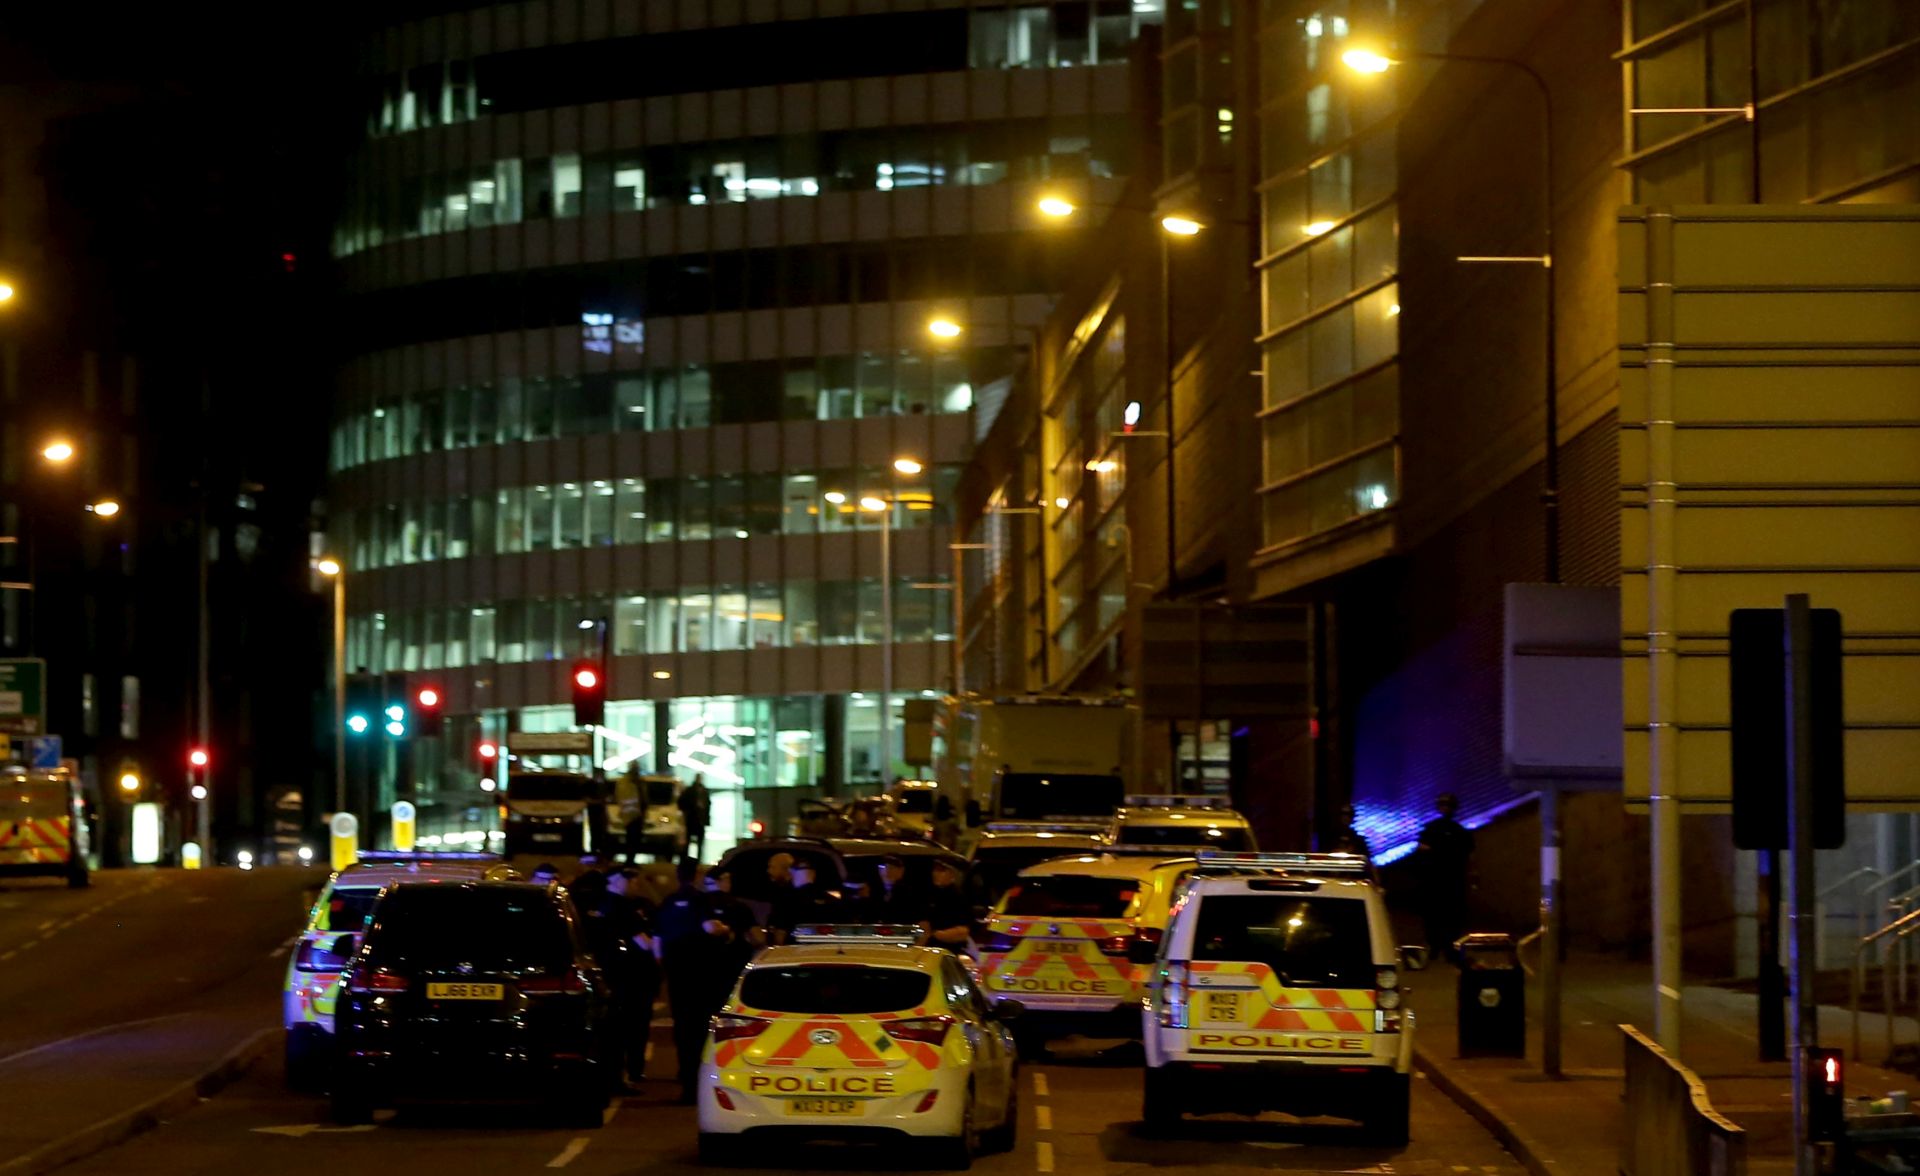 epa05982573 Emergency vehicles are seen outside the Manchester Arena following reports of an explosion, in Manchester, Britain, 23 May 2017. According to a statement released by the Greater Manchester Police on 23 May 2017, police responded to reports of an explosion at Manchester Arena on 22 May 2017 evening. At least 19 people have been confirmed dead and others 50 were injured, authorities said. The happening is currently treated as a terrorist incident until police know otherwise. According to reports quoting witnesses, a mass evacuation was prompted after explosions were heard at the end of US singer Ariana Grande's concert in the arena.  EPA/NIGEL RODDIS